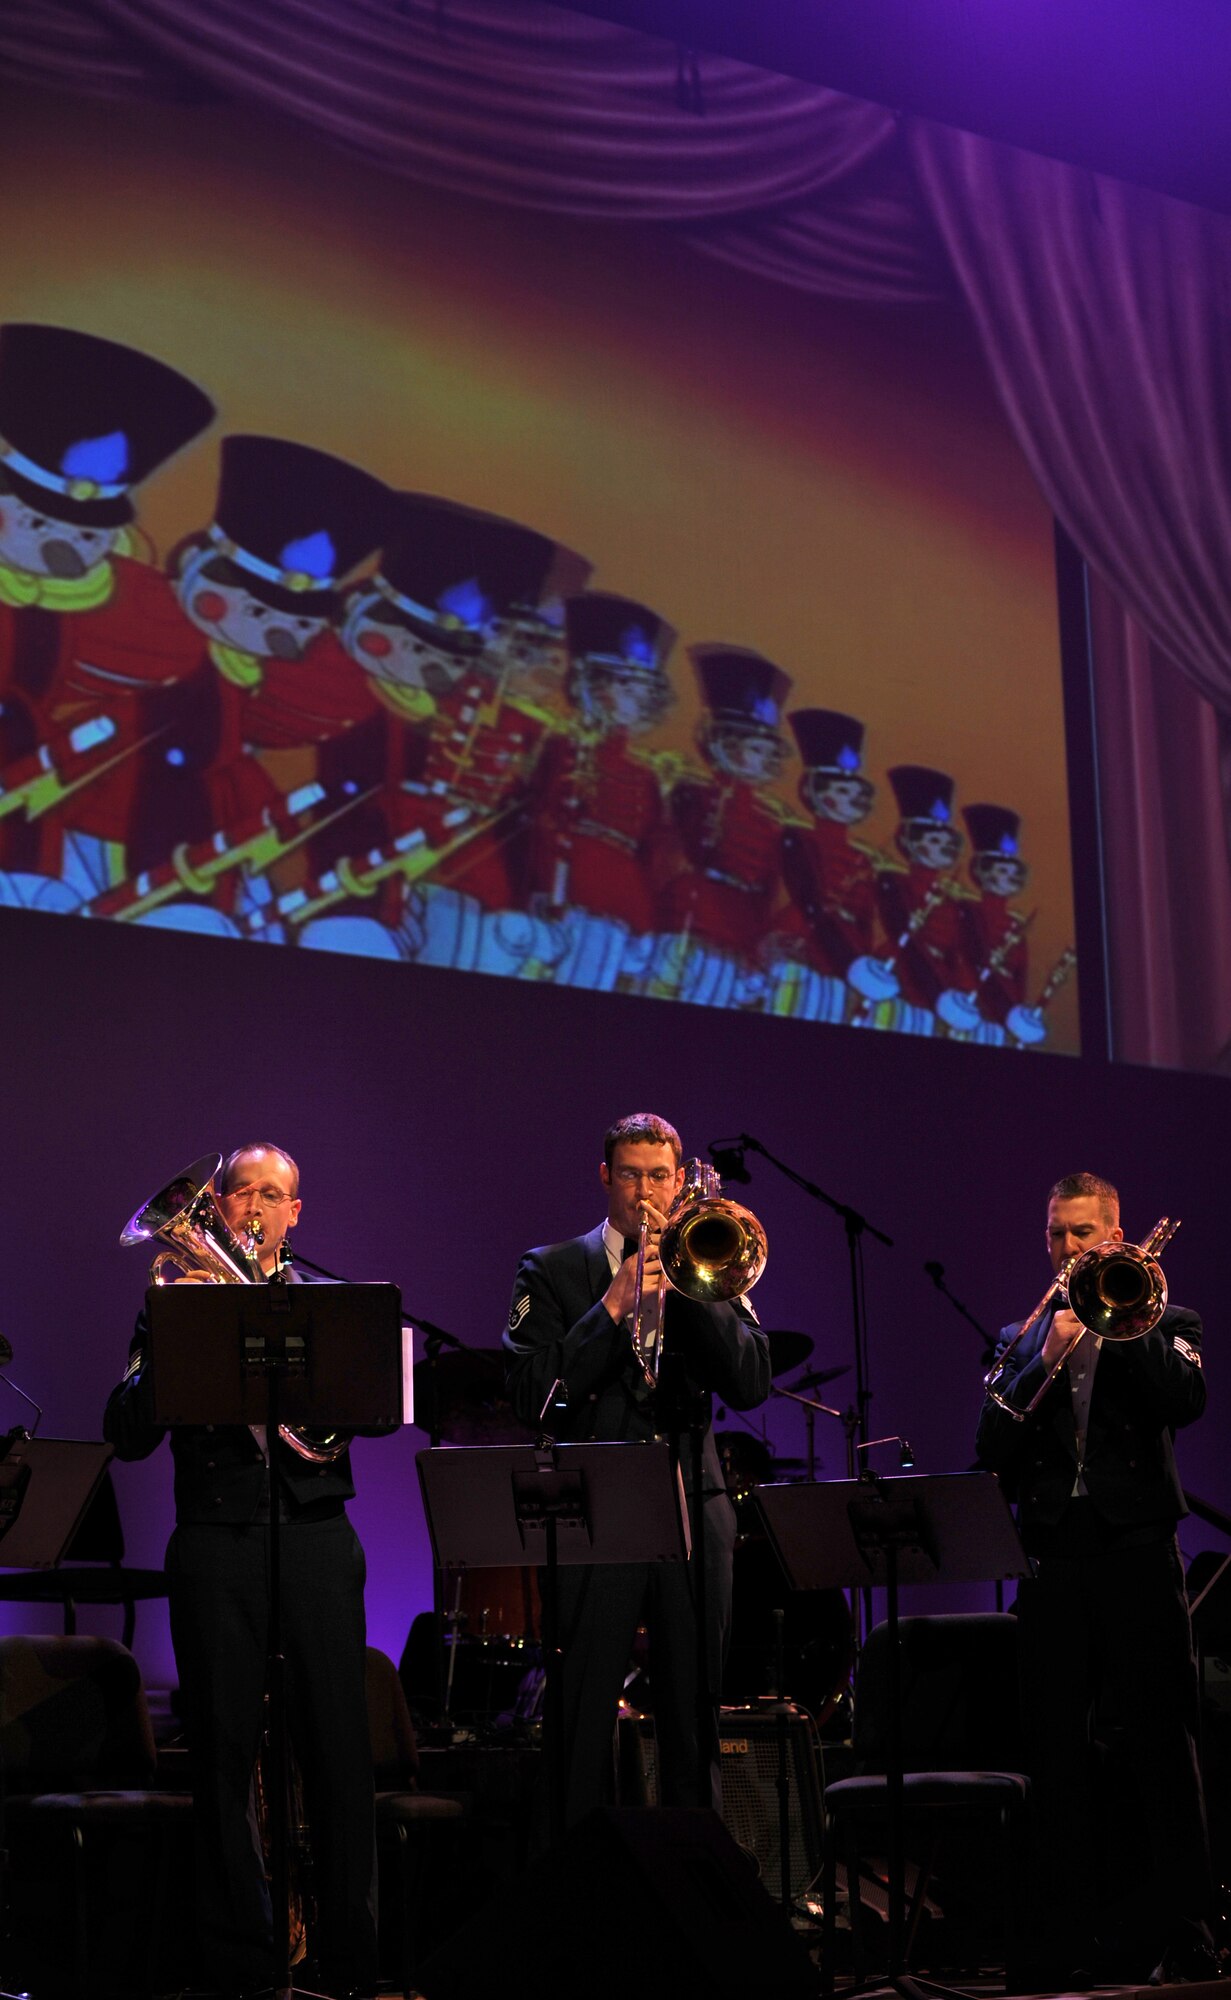 OFFUTT AIR FORCE BASE, Neb. -- The Heartland of America Band's Brass in Blue ensemble perfrom "March of the Toys" as the cartoon Babes in Toyland plays on the big screen behind them, Dec. 12 at the Holland Performing Arts Center.  The performance was part of the band's annual Holiday concert series. 
U.S. Air Force Photo by Josh Plueger